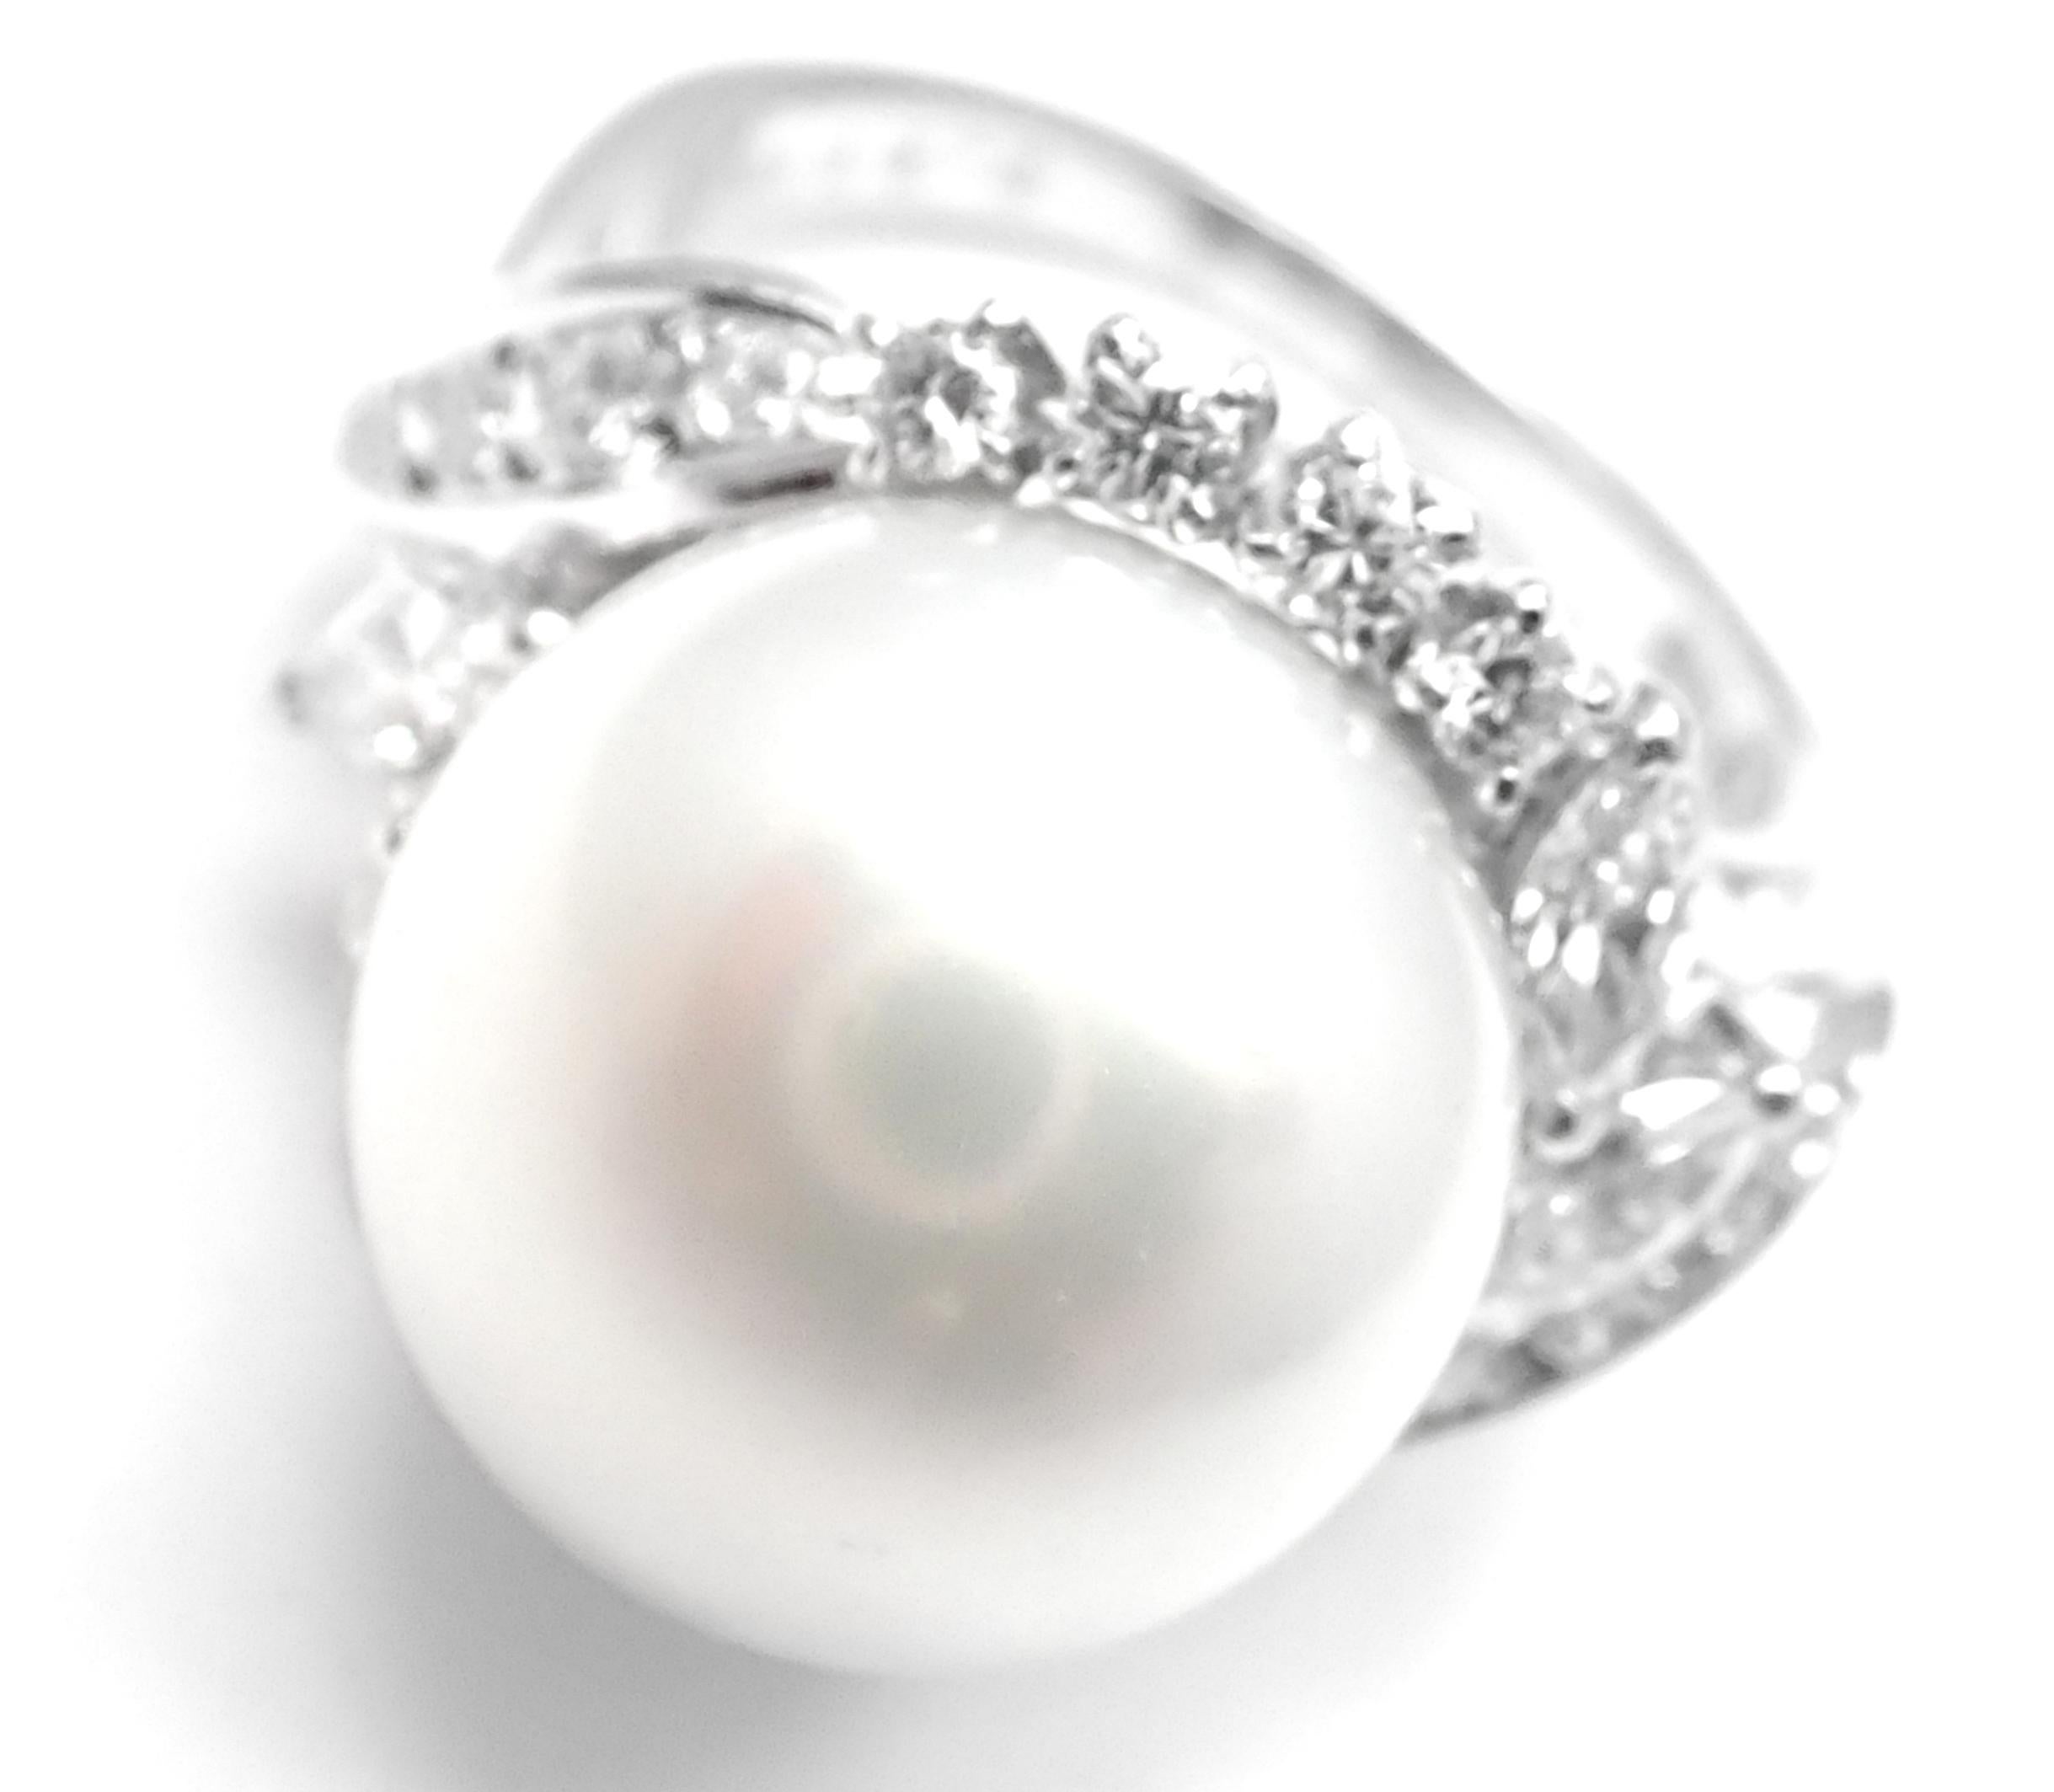 Platinum Diamond Large 12.5mm South Sea Pearl Ring by Mikimoto. 
With Diamonds VS1 clarity, G color total weight approximately .69ct
1 South Sea large pearl 12.5mm each
Details: 
Ring Size: 5 1/4, Resize Available
Weight: 10.7 grams
Stamped